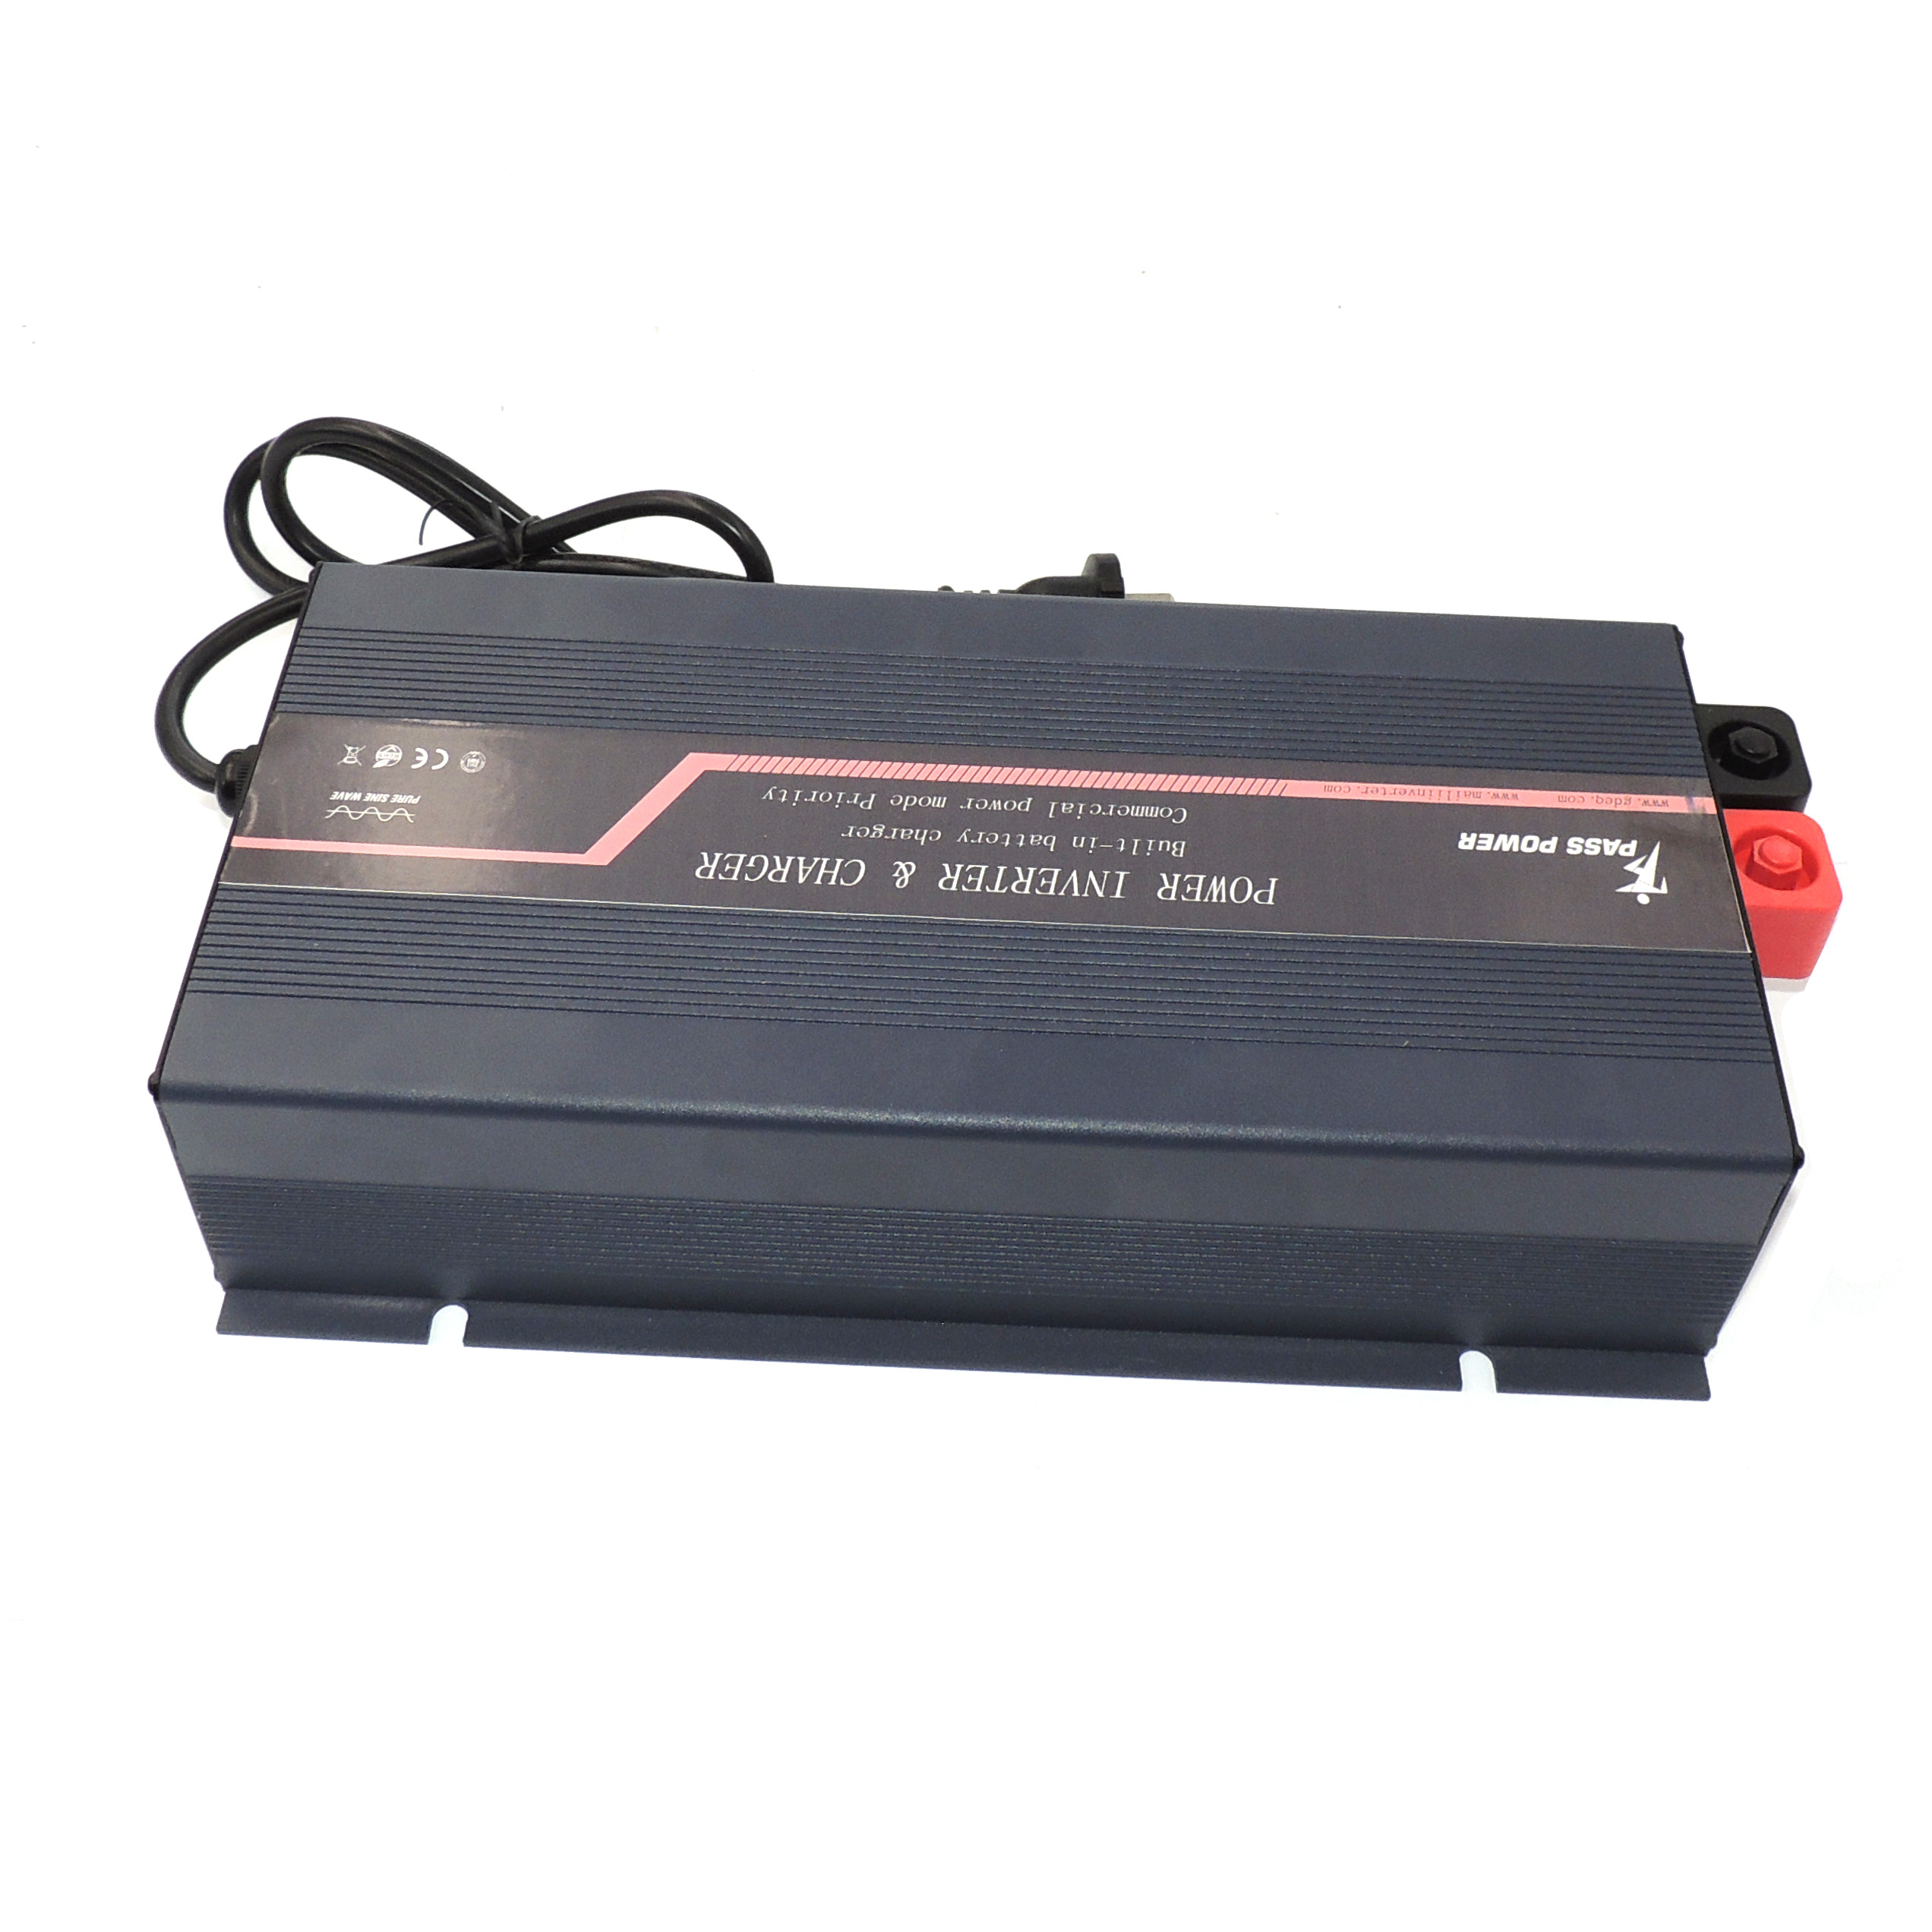 1500w Off Grid High Frequency Pure Sine Wave Inverter With 10A Battery Charger and UPS Built in for home application